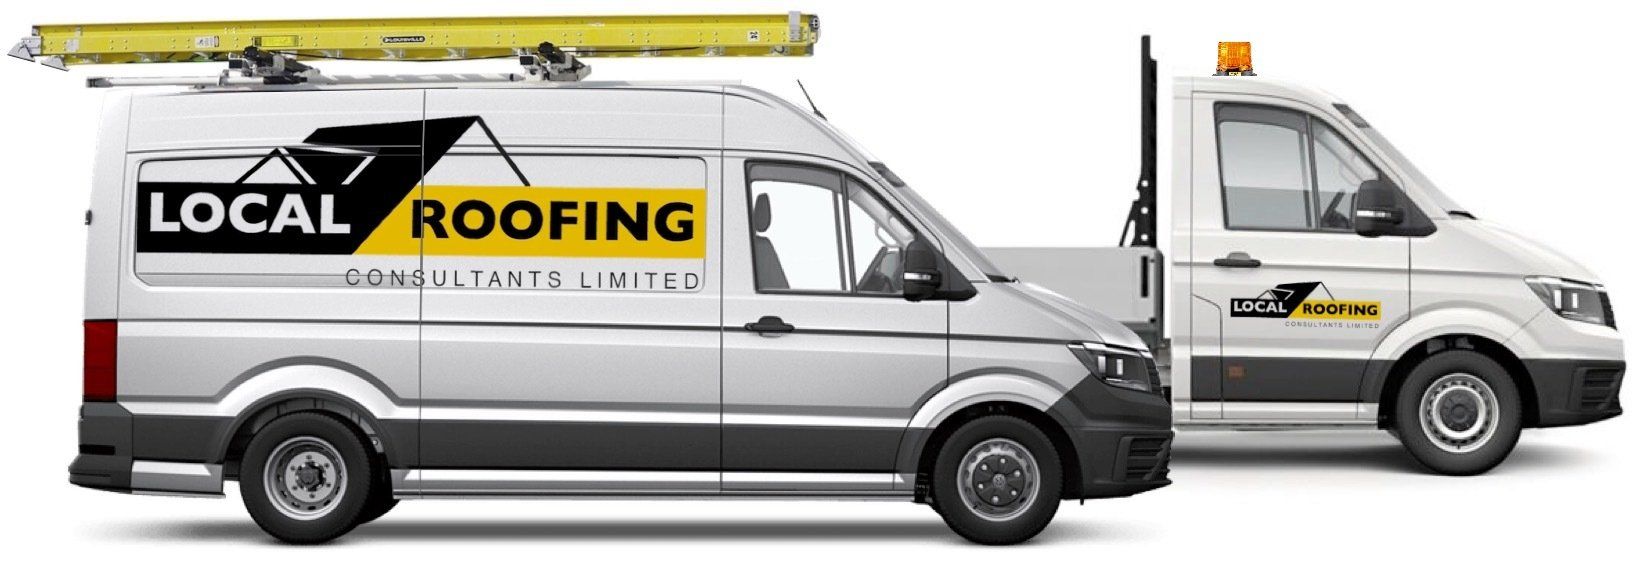 Local Roofing Consultants Limited work in Islington and throughout the London area